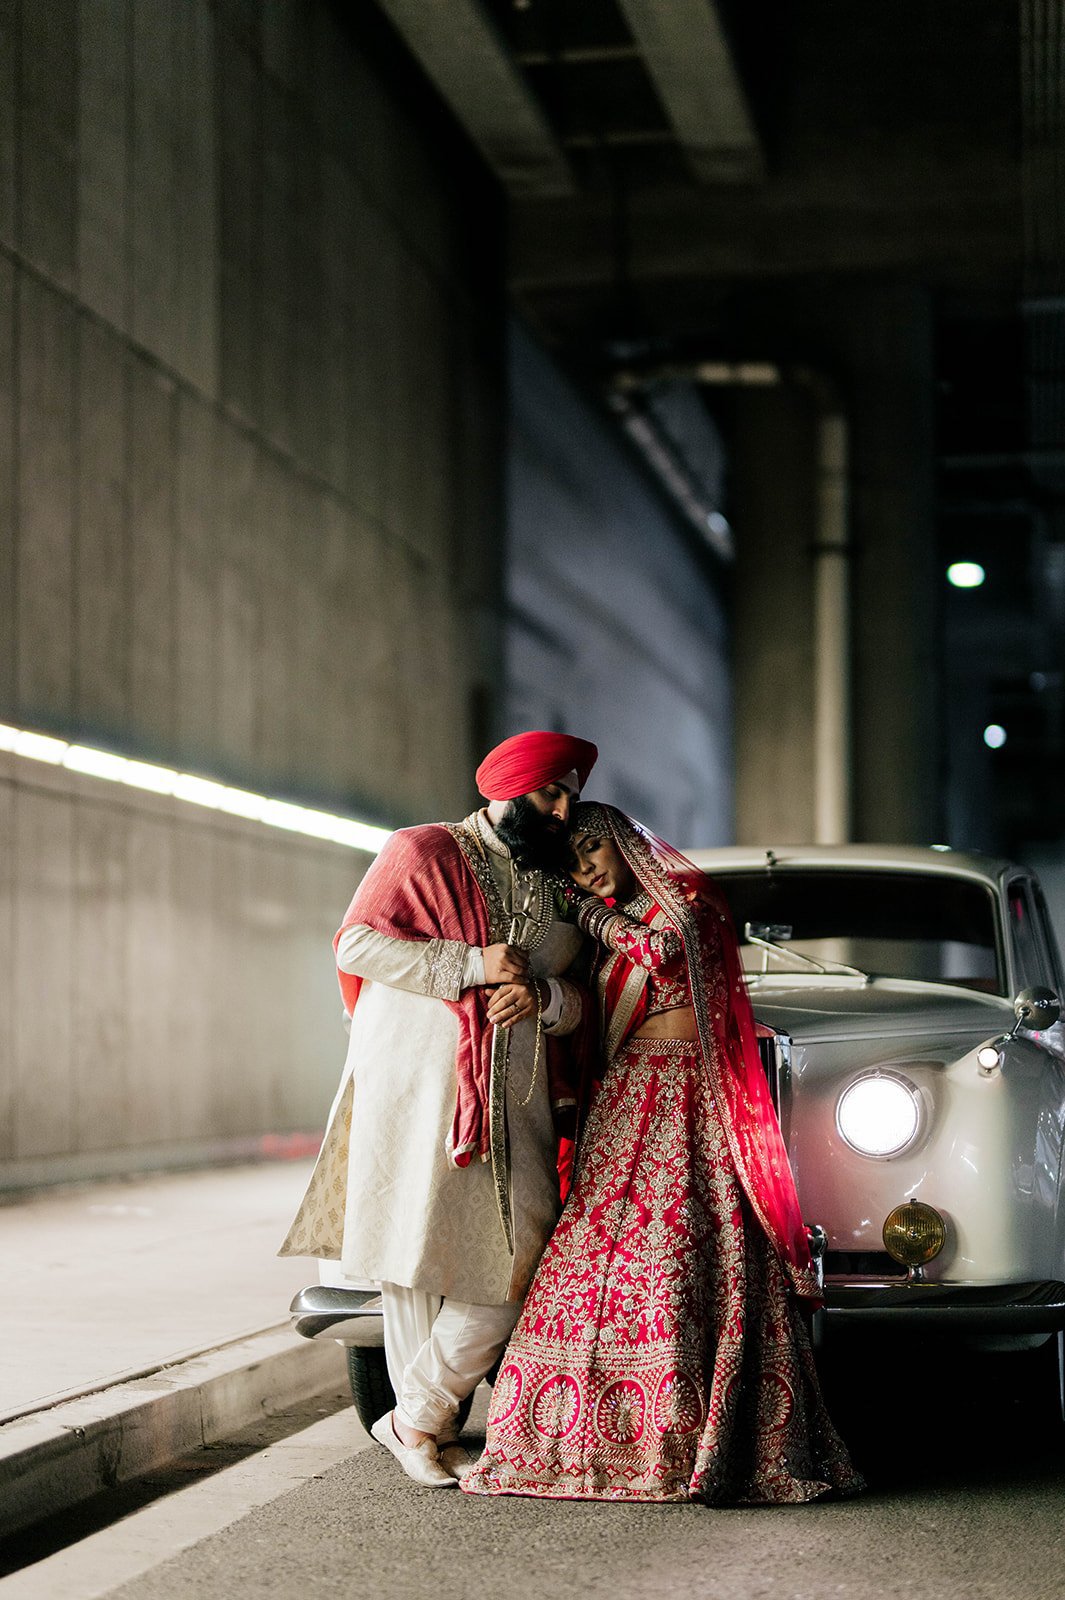 A bride and groom in traditional wedding clothes cuddle on the hood of a vintage car in a surprisingly beautiful tunnel.